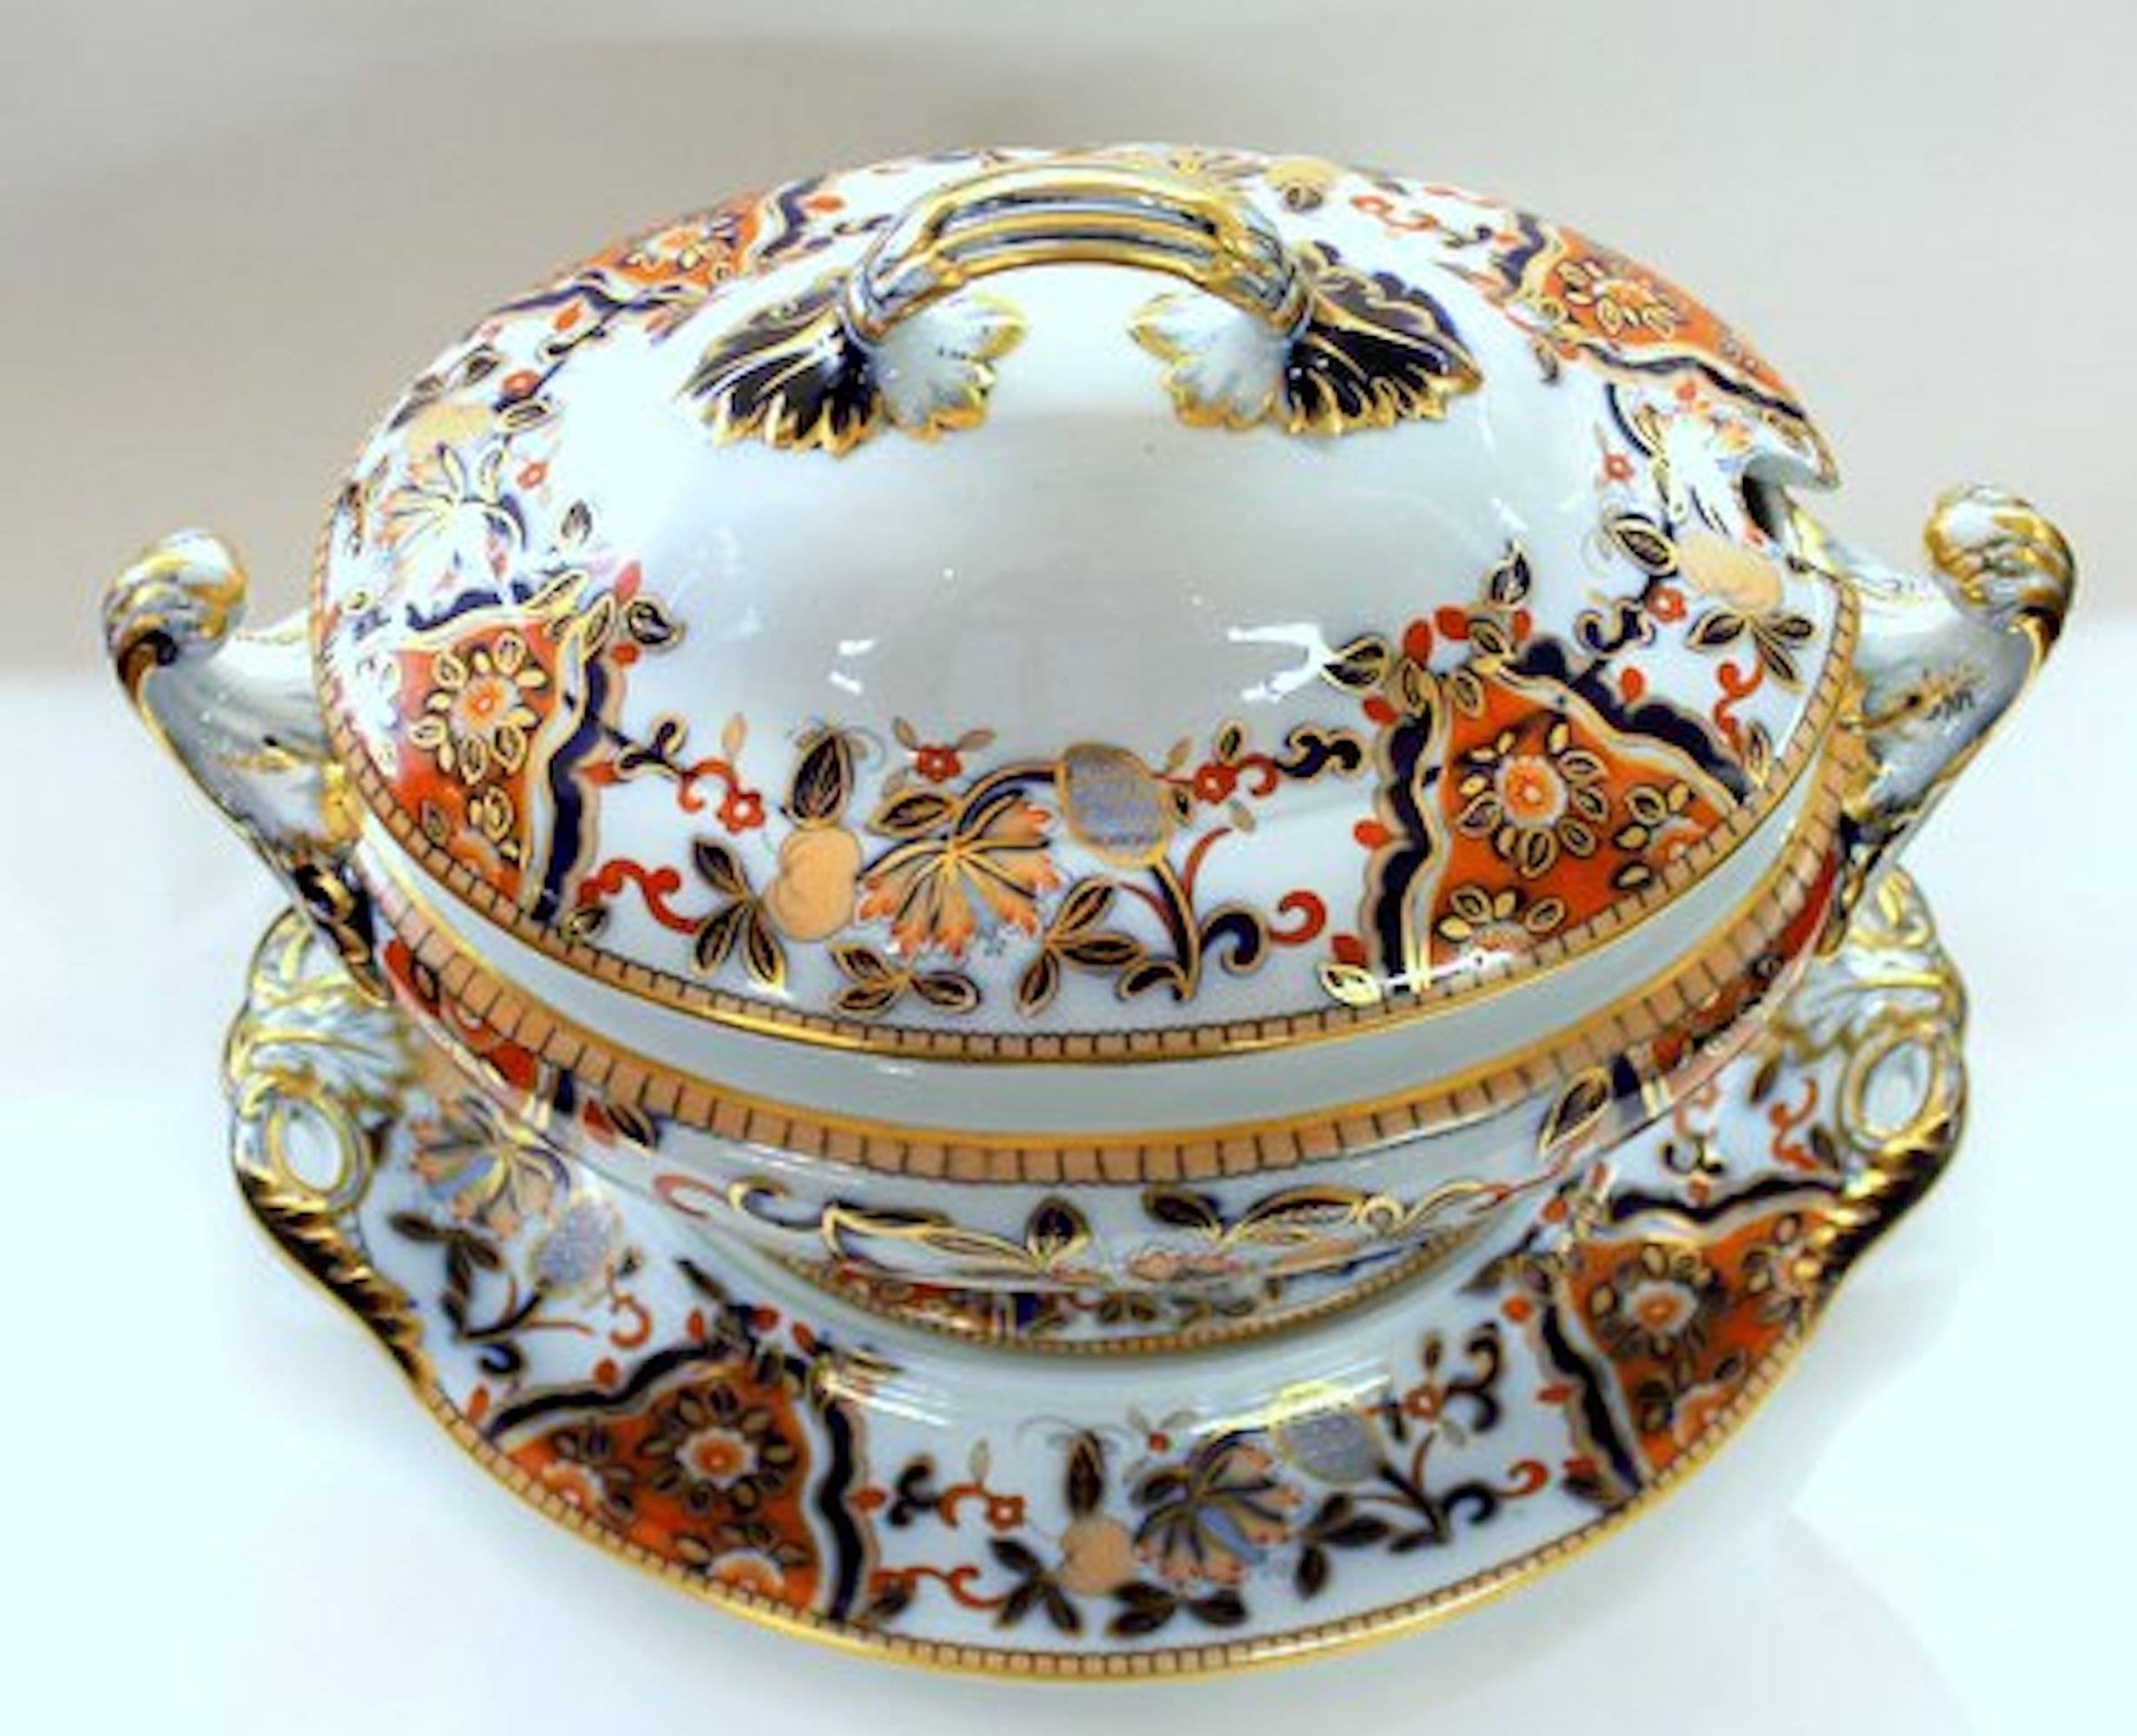 Exceptional quality antique English Davenport ironstone hand decorated Imari large soup tureen and stand with rare printed mark, circa 1840-1860. This tureen appears to have been kept as a cabinet piece only and is in pristine condition showing no